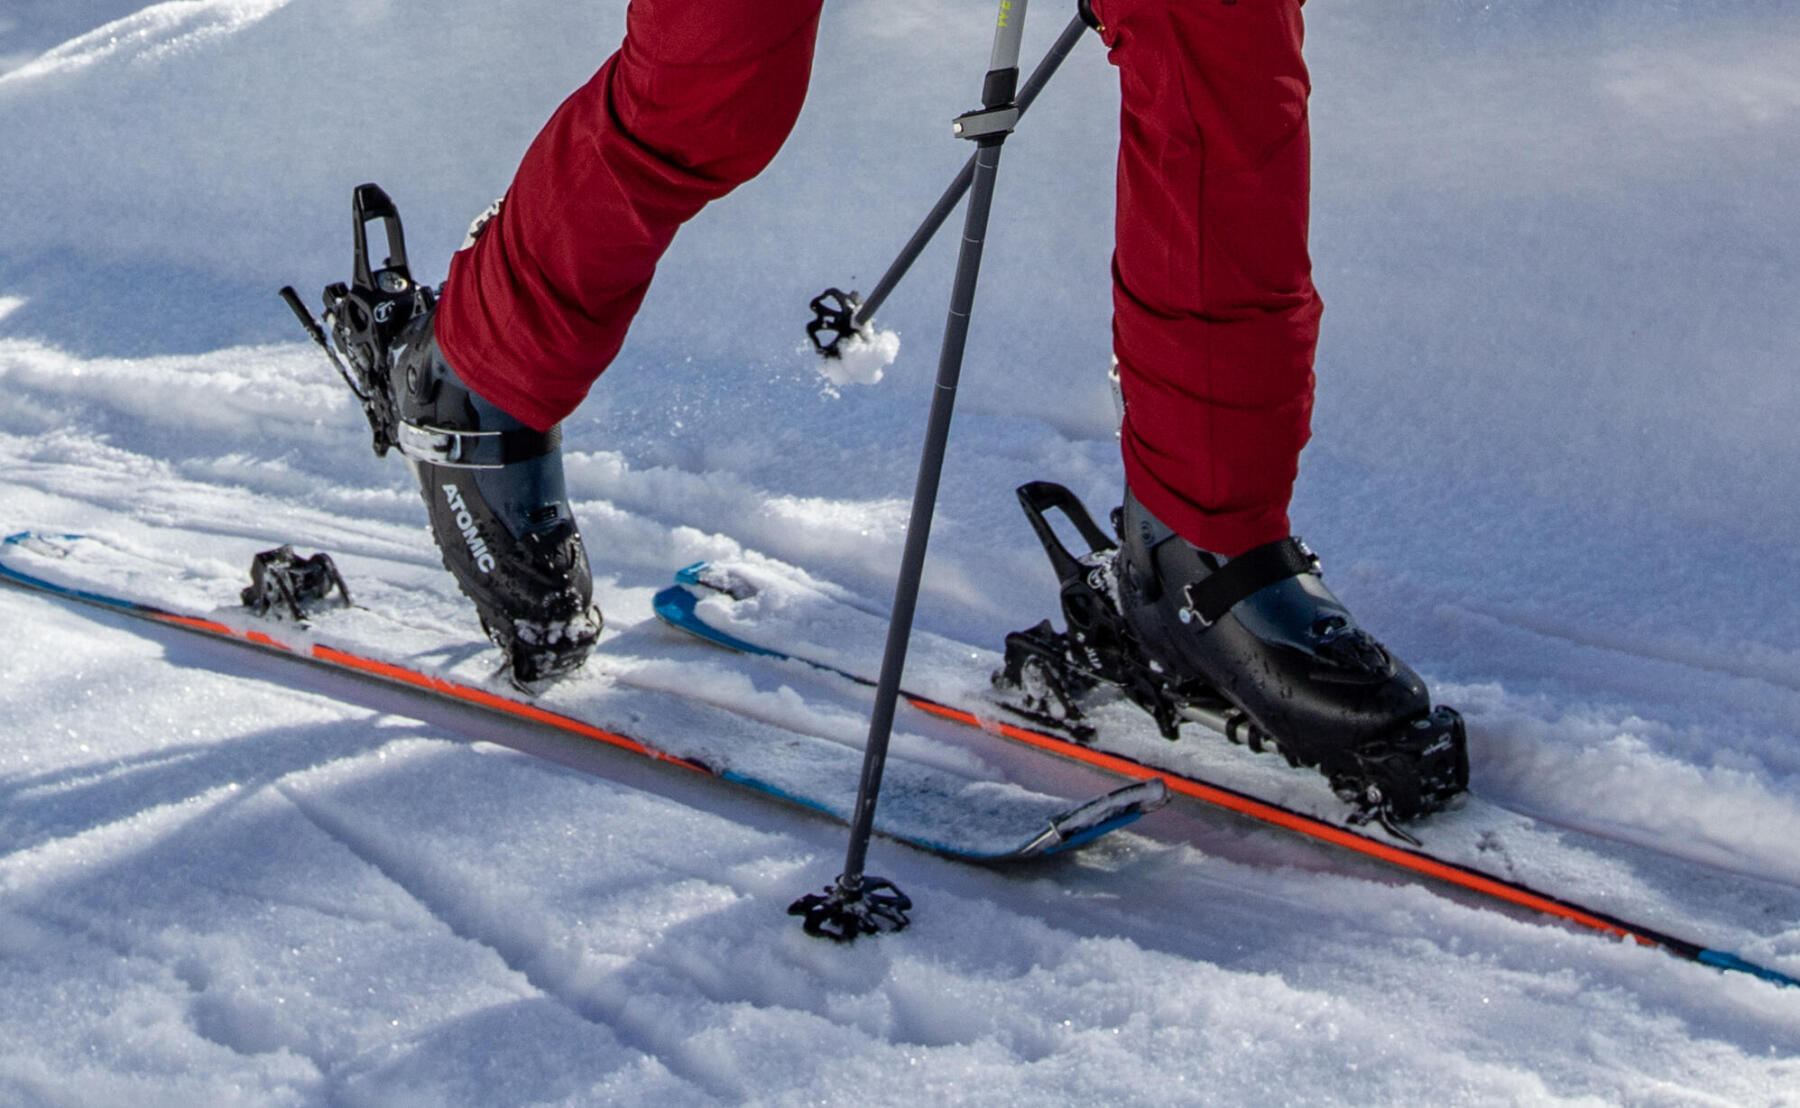 HOW TO CHOOSE YOUR FREERIDE/TOURING BINDINGS